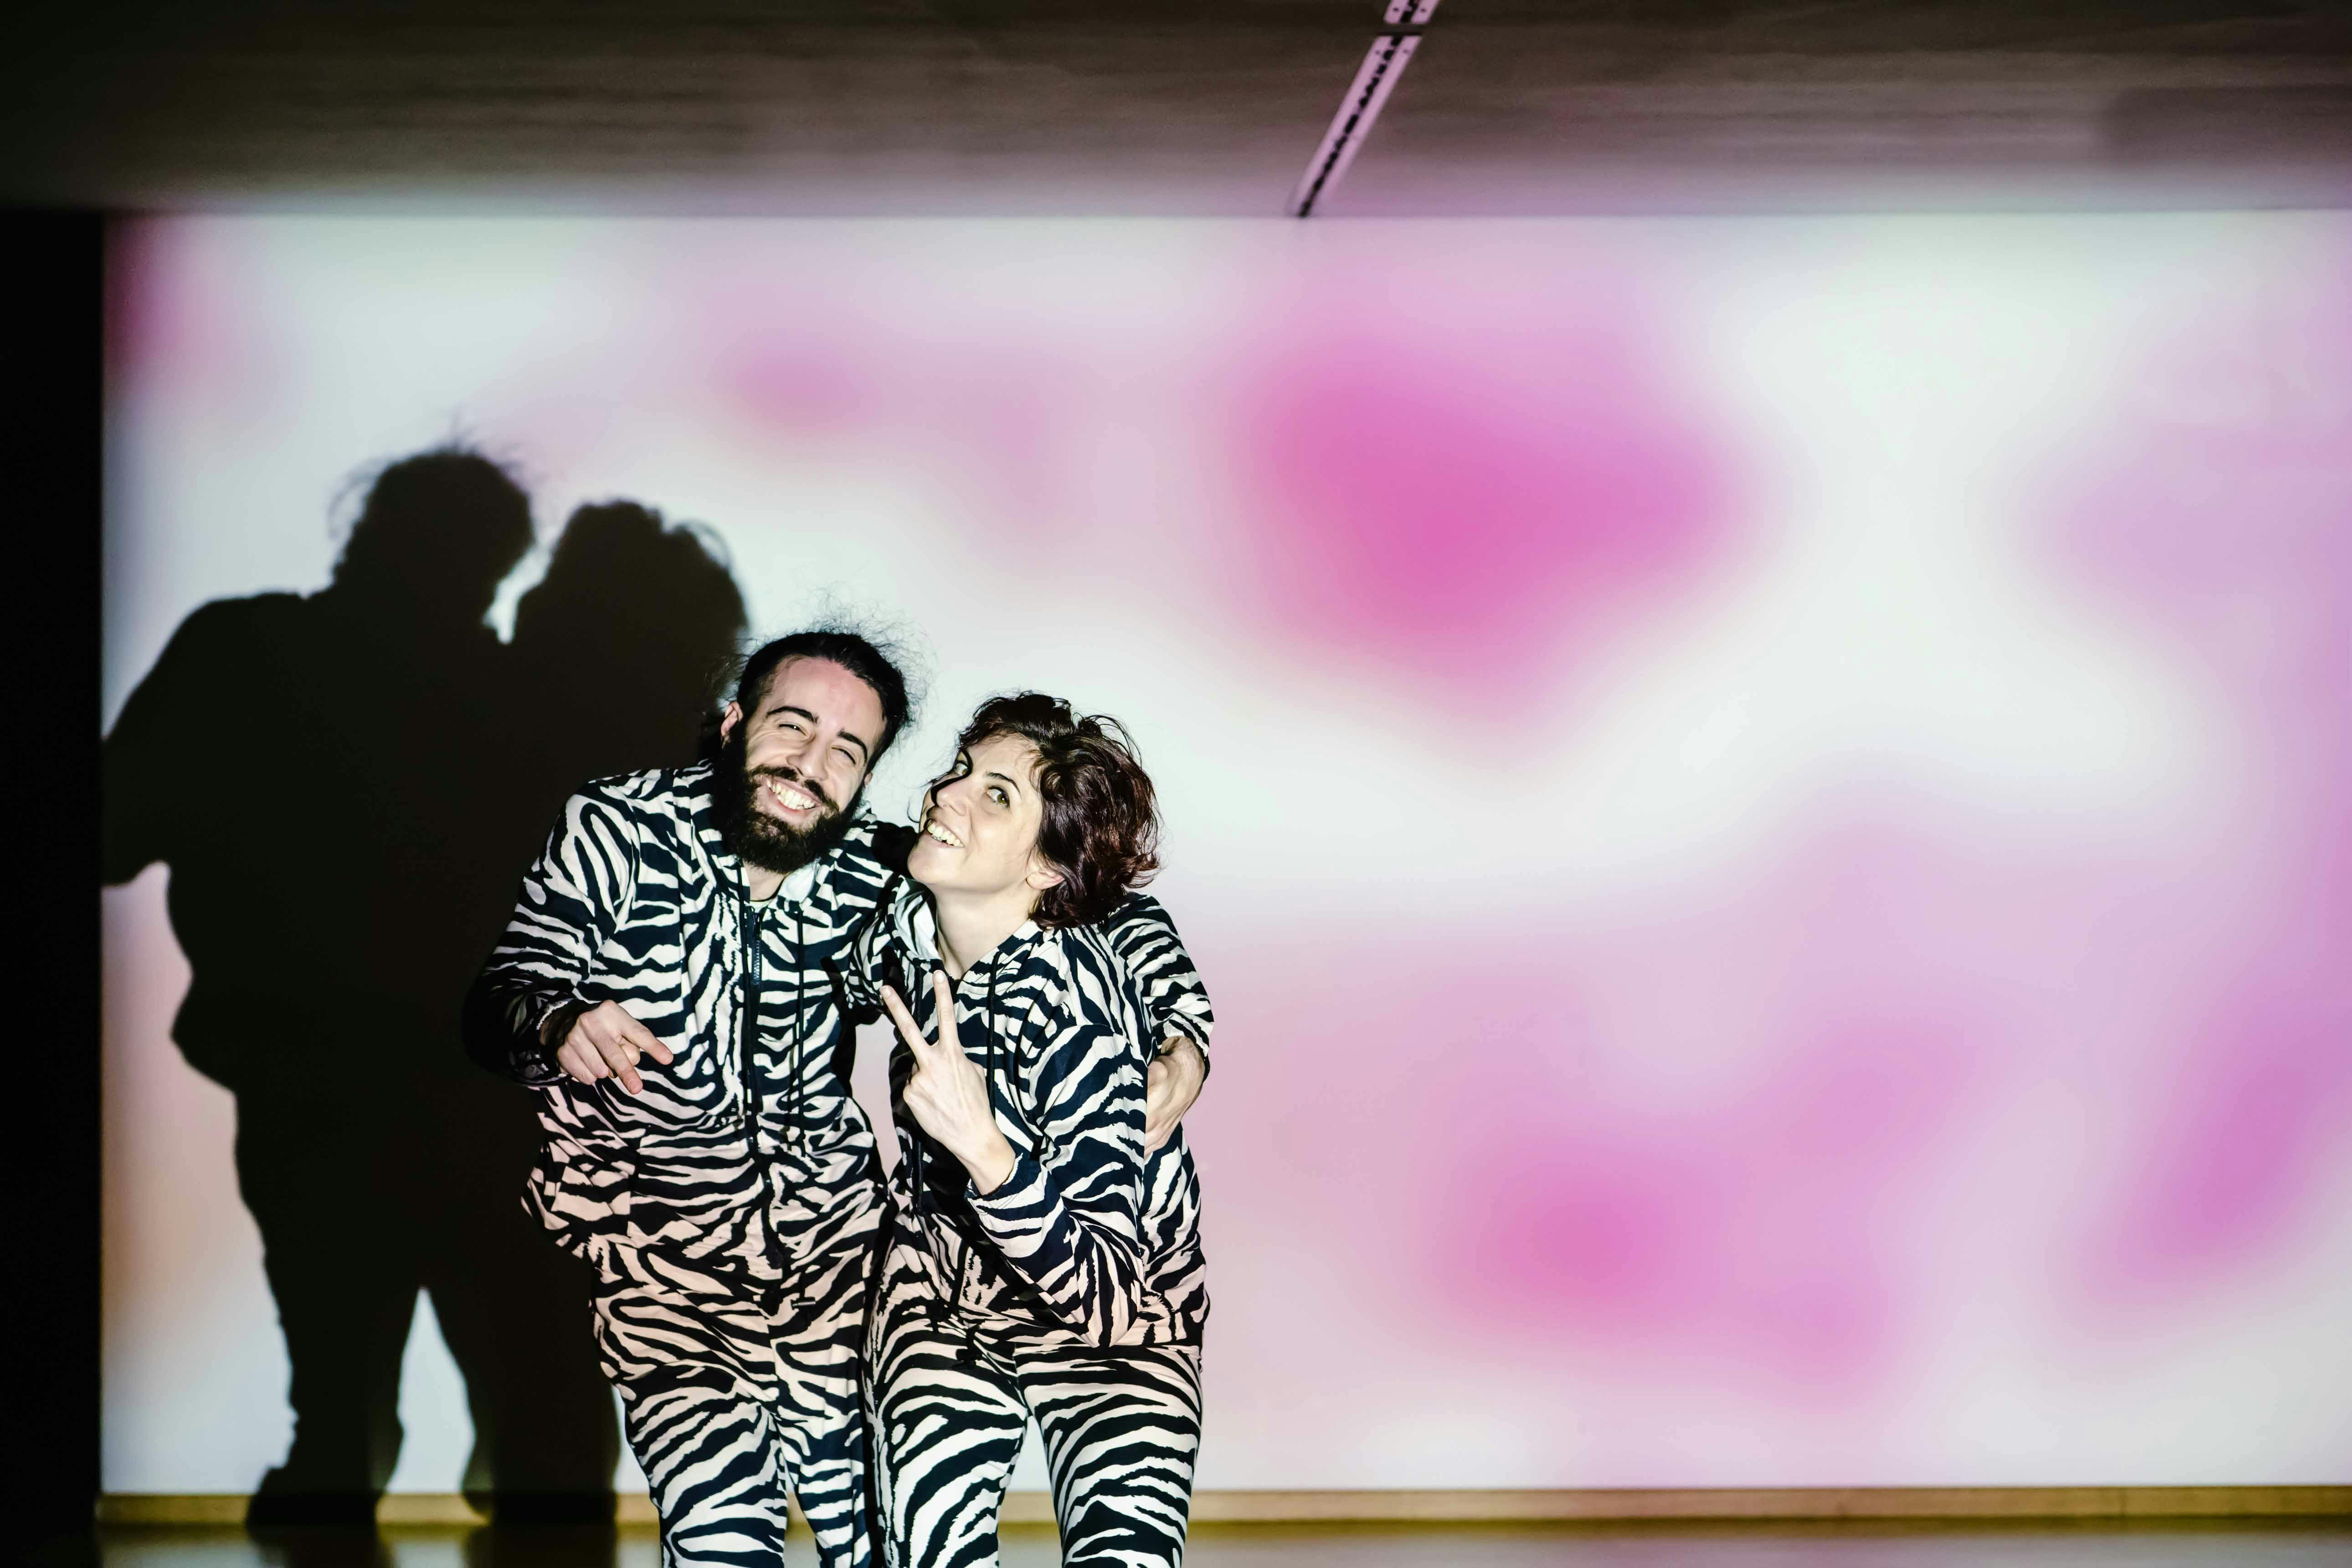 Giselda and Michael dressed in black and white patterned pants and sweatshirt as the zebra are posing embraced